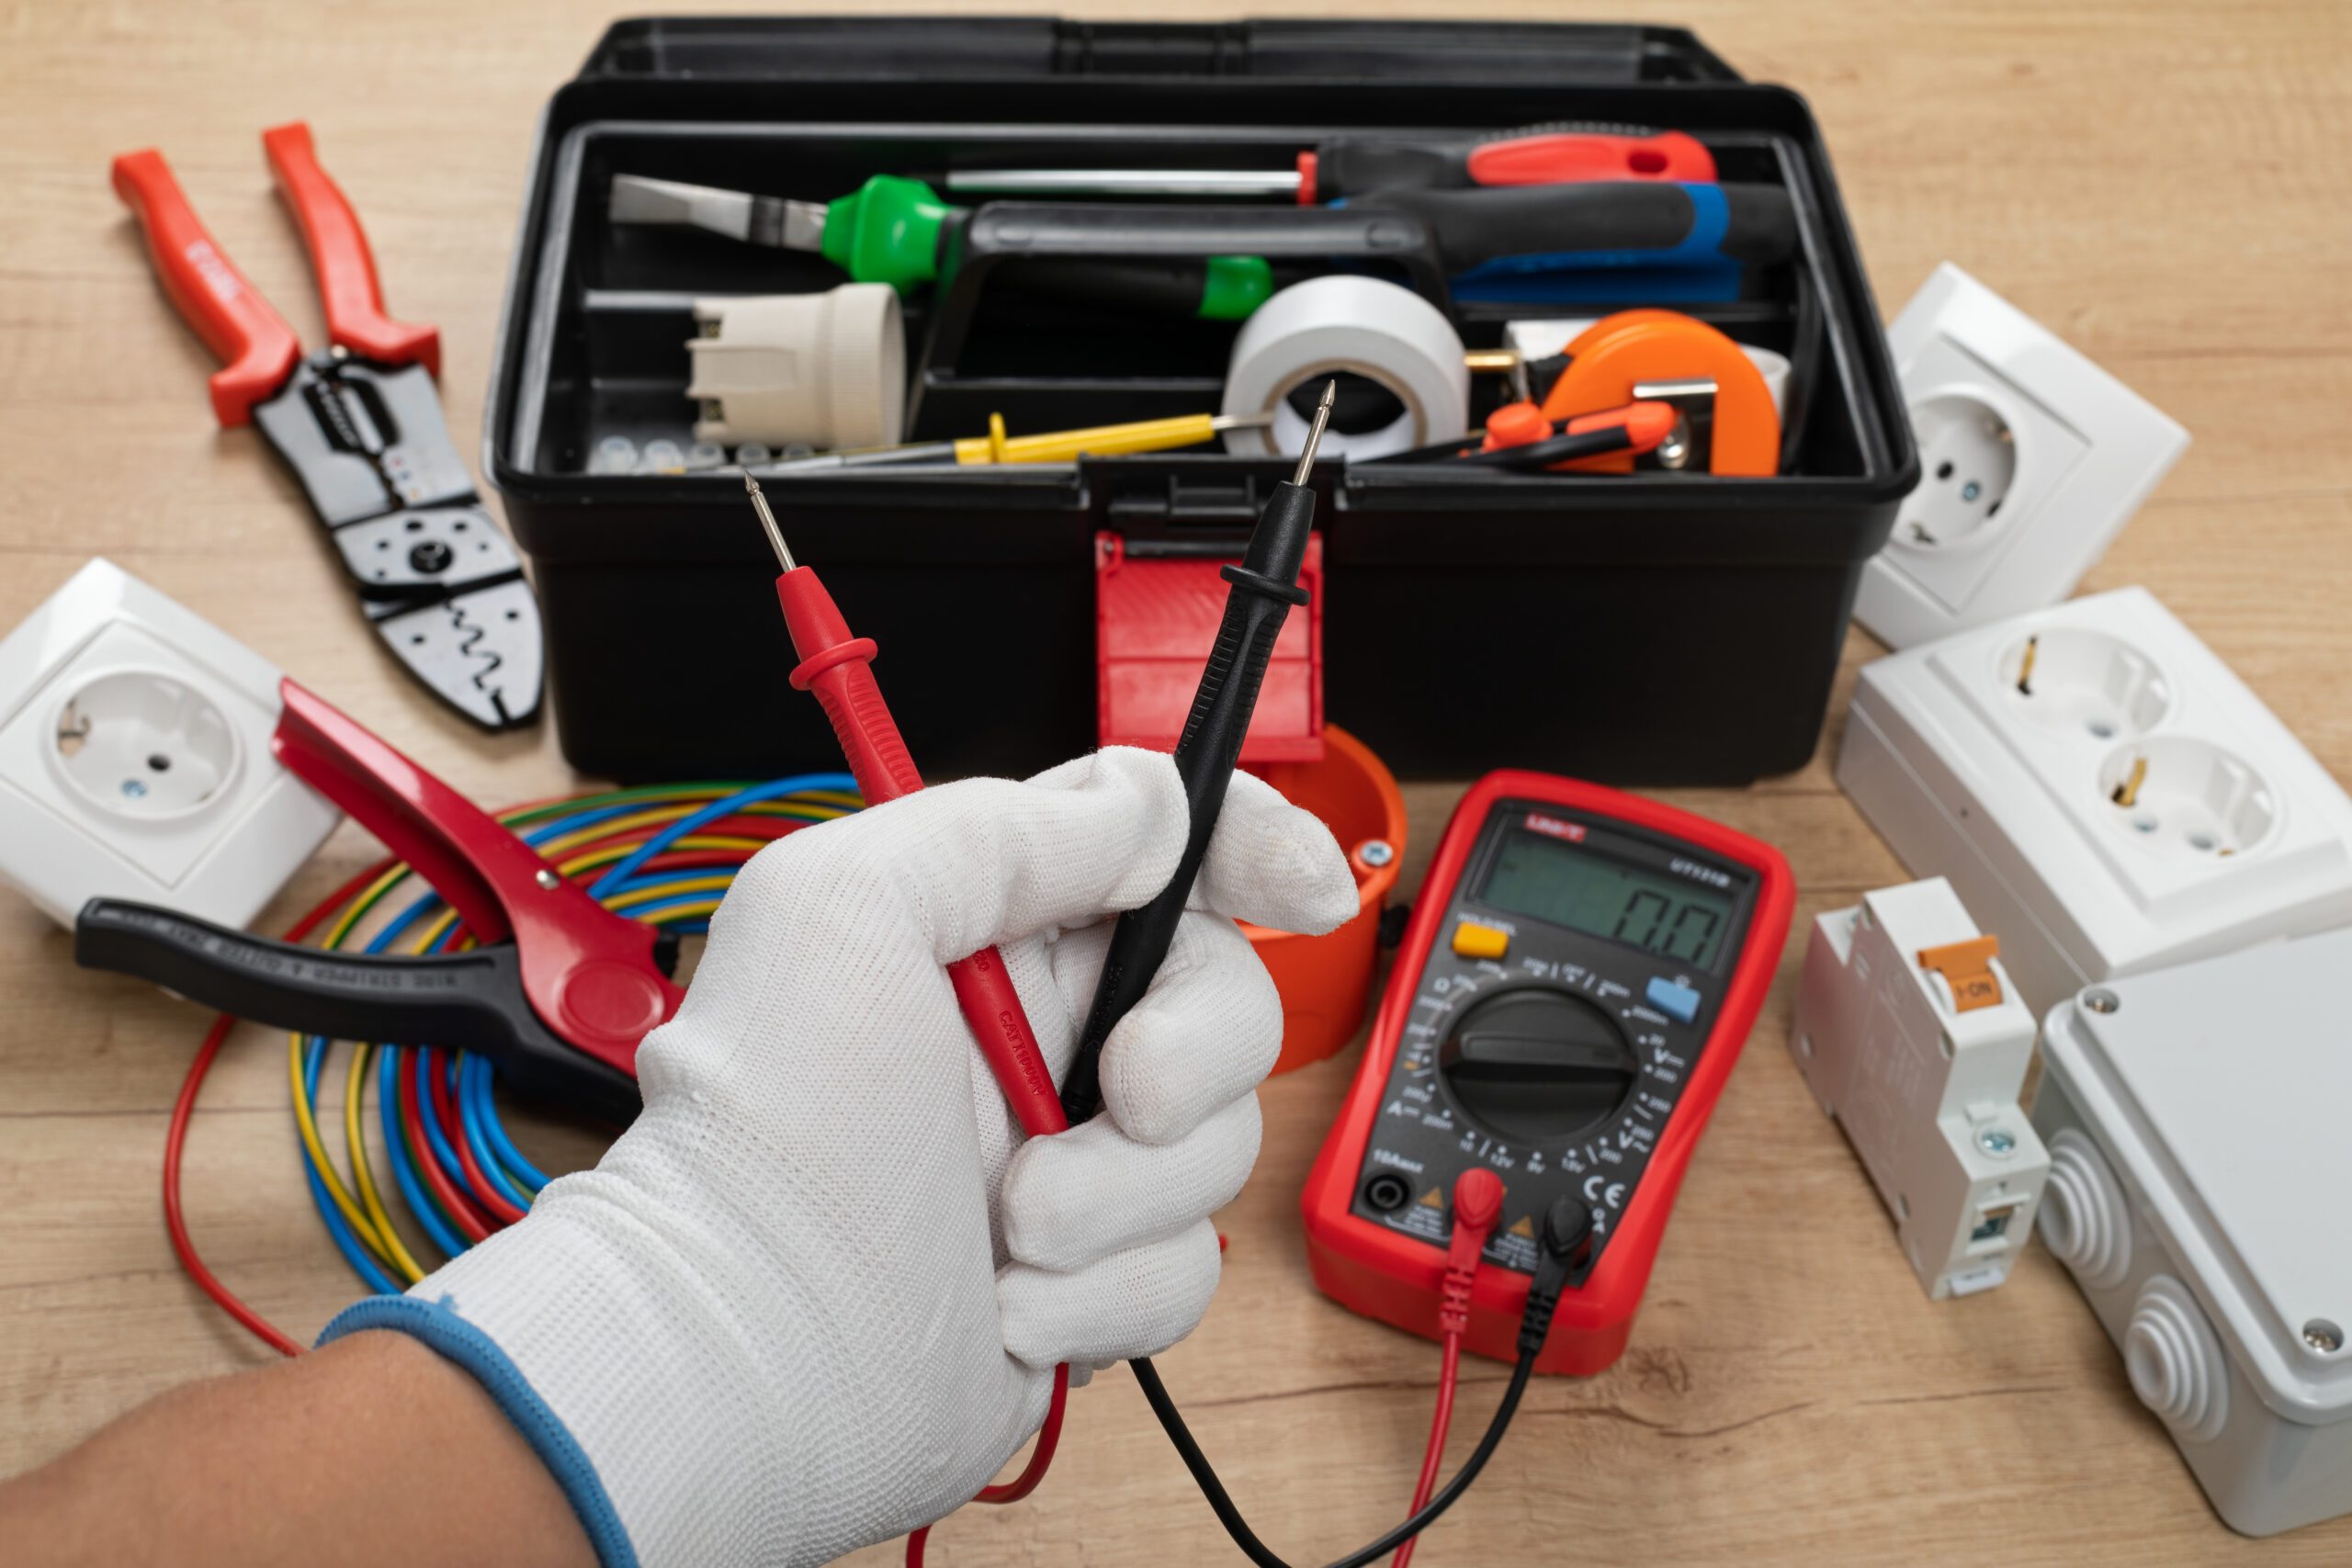 Knob and tube wiring services and installation